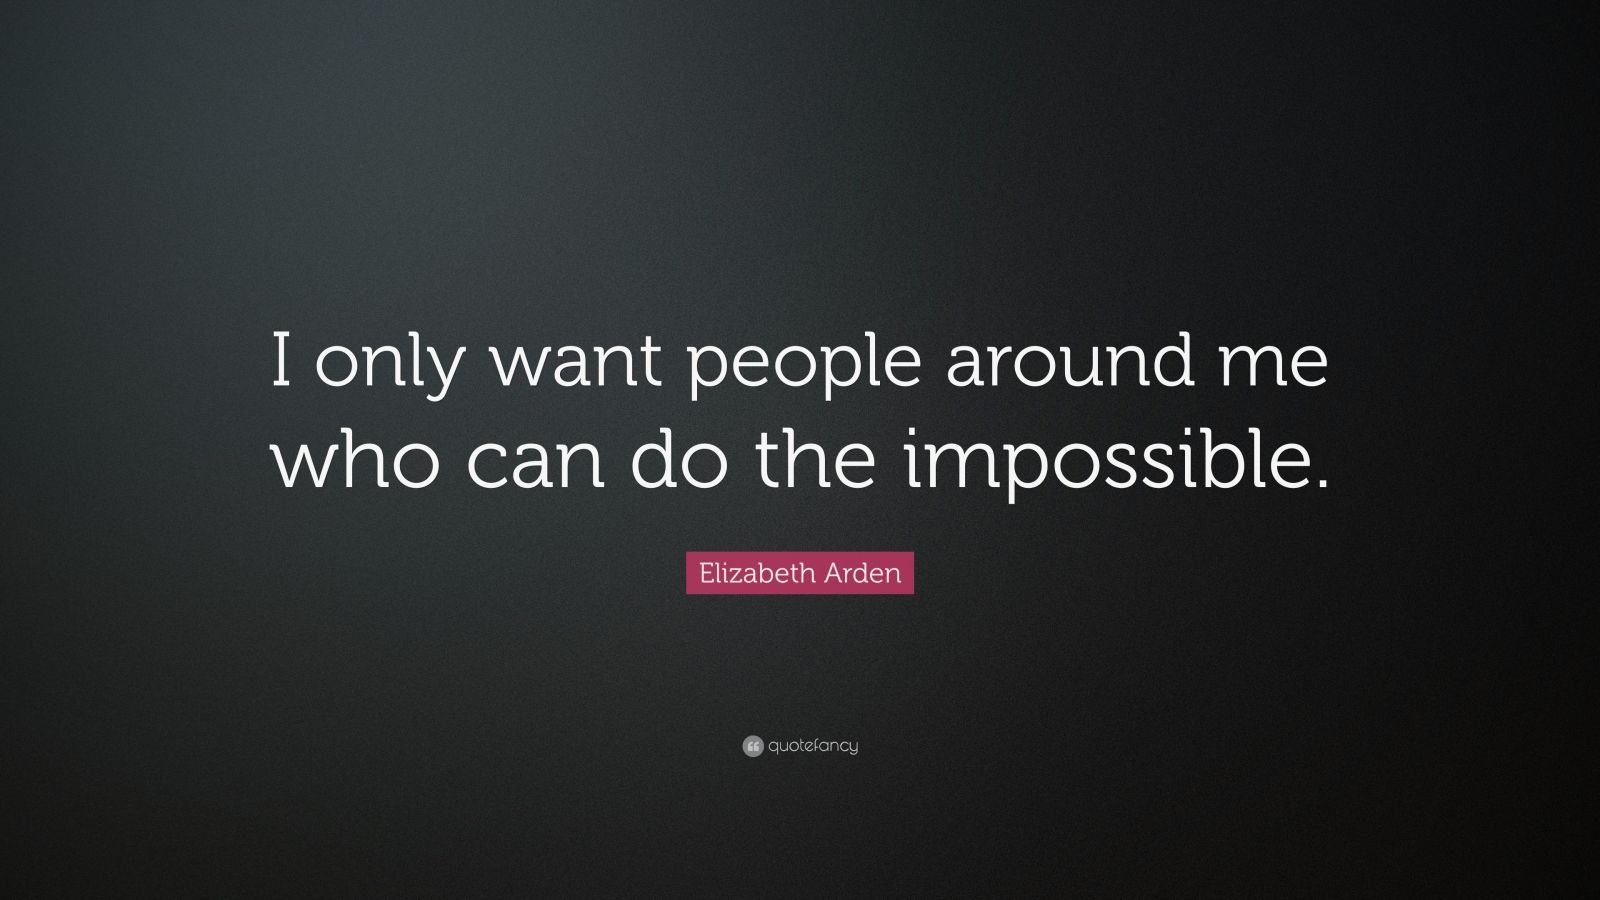 Elizabeth Arden Quote: “I only want people around me who can do the ...